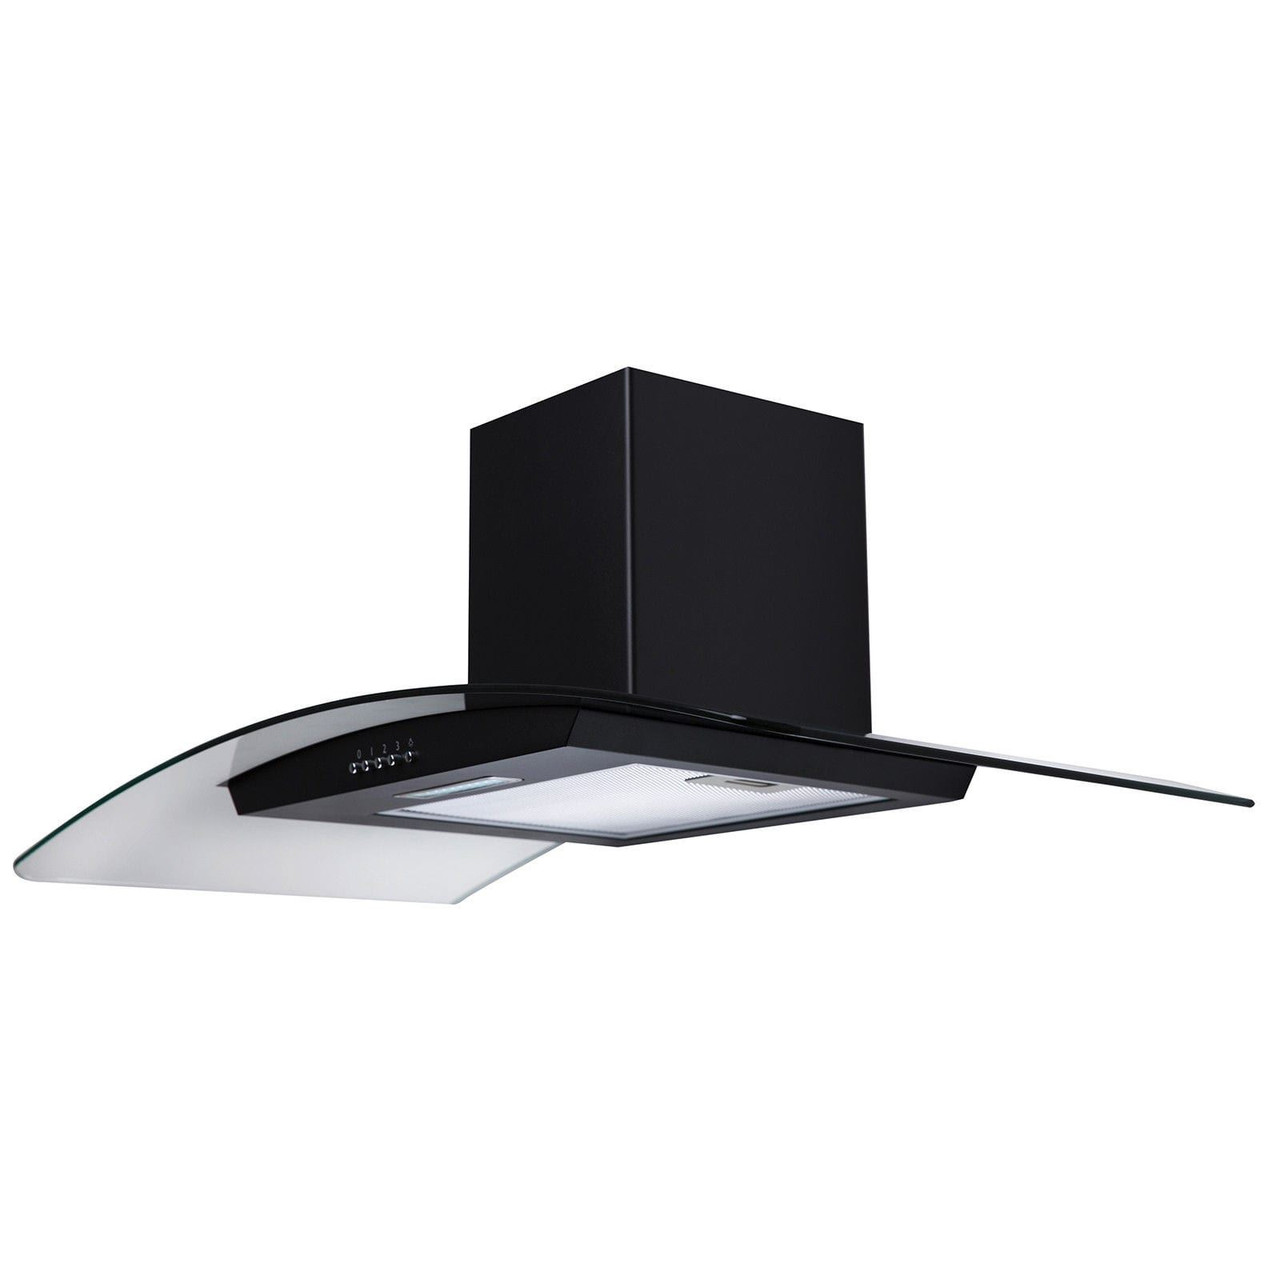 SIA 90cm Black 5 Zone Touch Control Induction Hob & Angled Glass Cooker Hood Fan